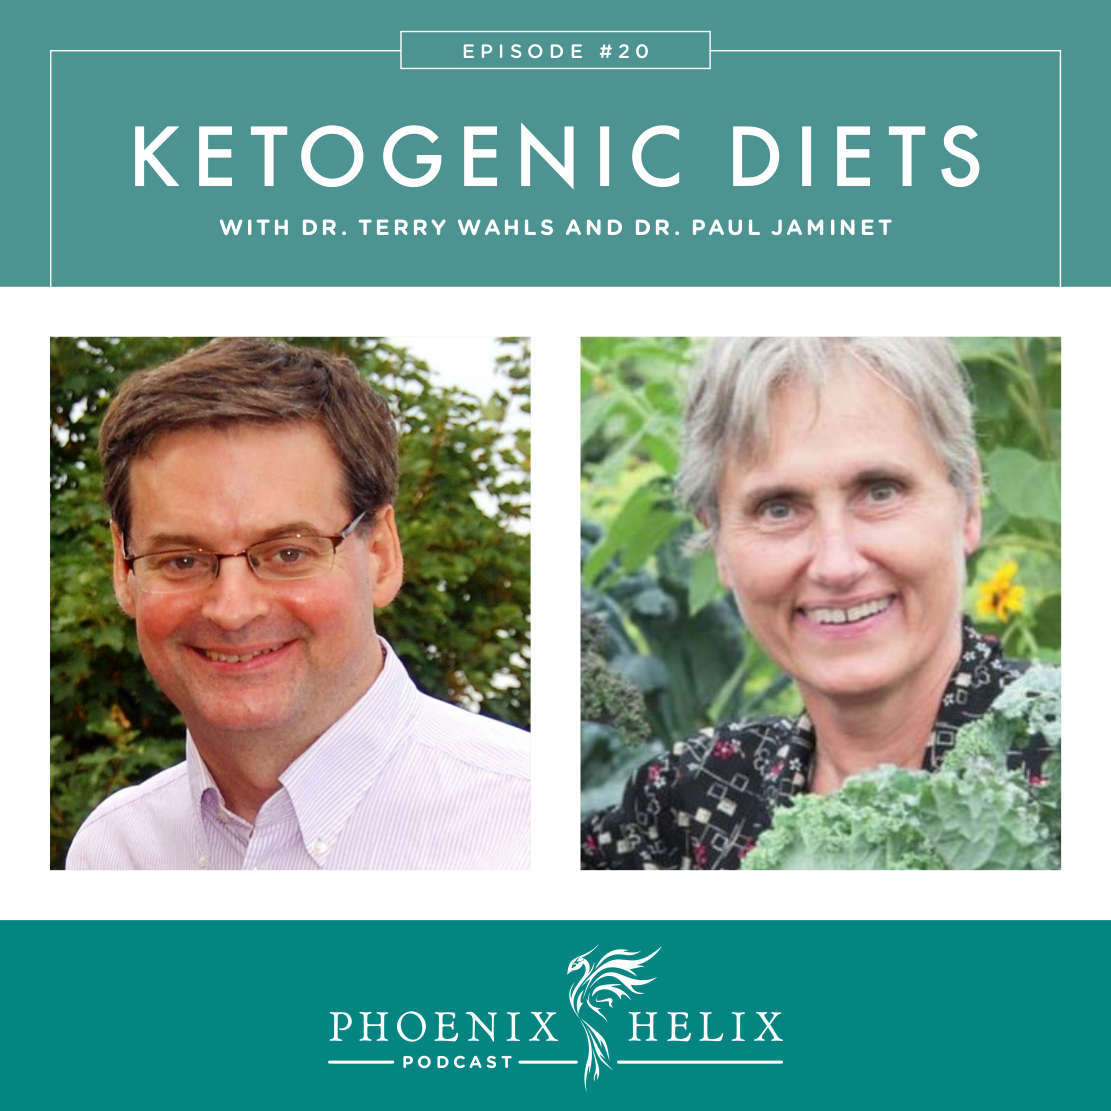 Ketogenic Diets with Dr. Terry Wahls and Dr. Paul Jaminet | Phoenix Helix Podcast